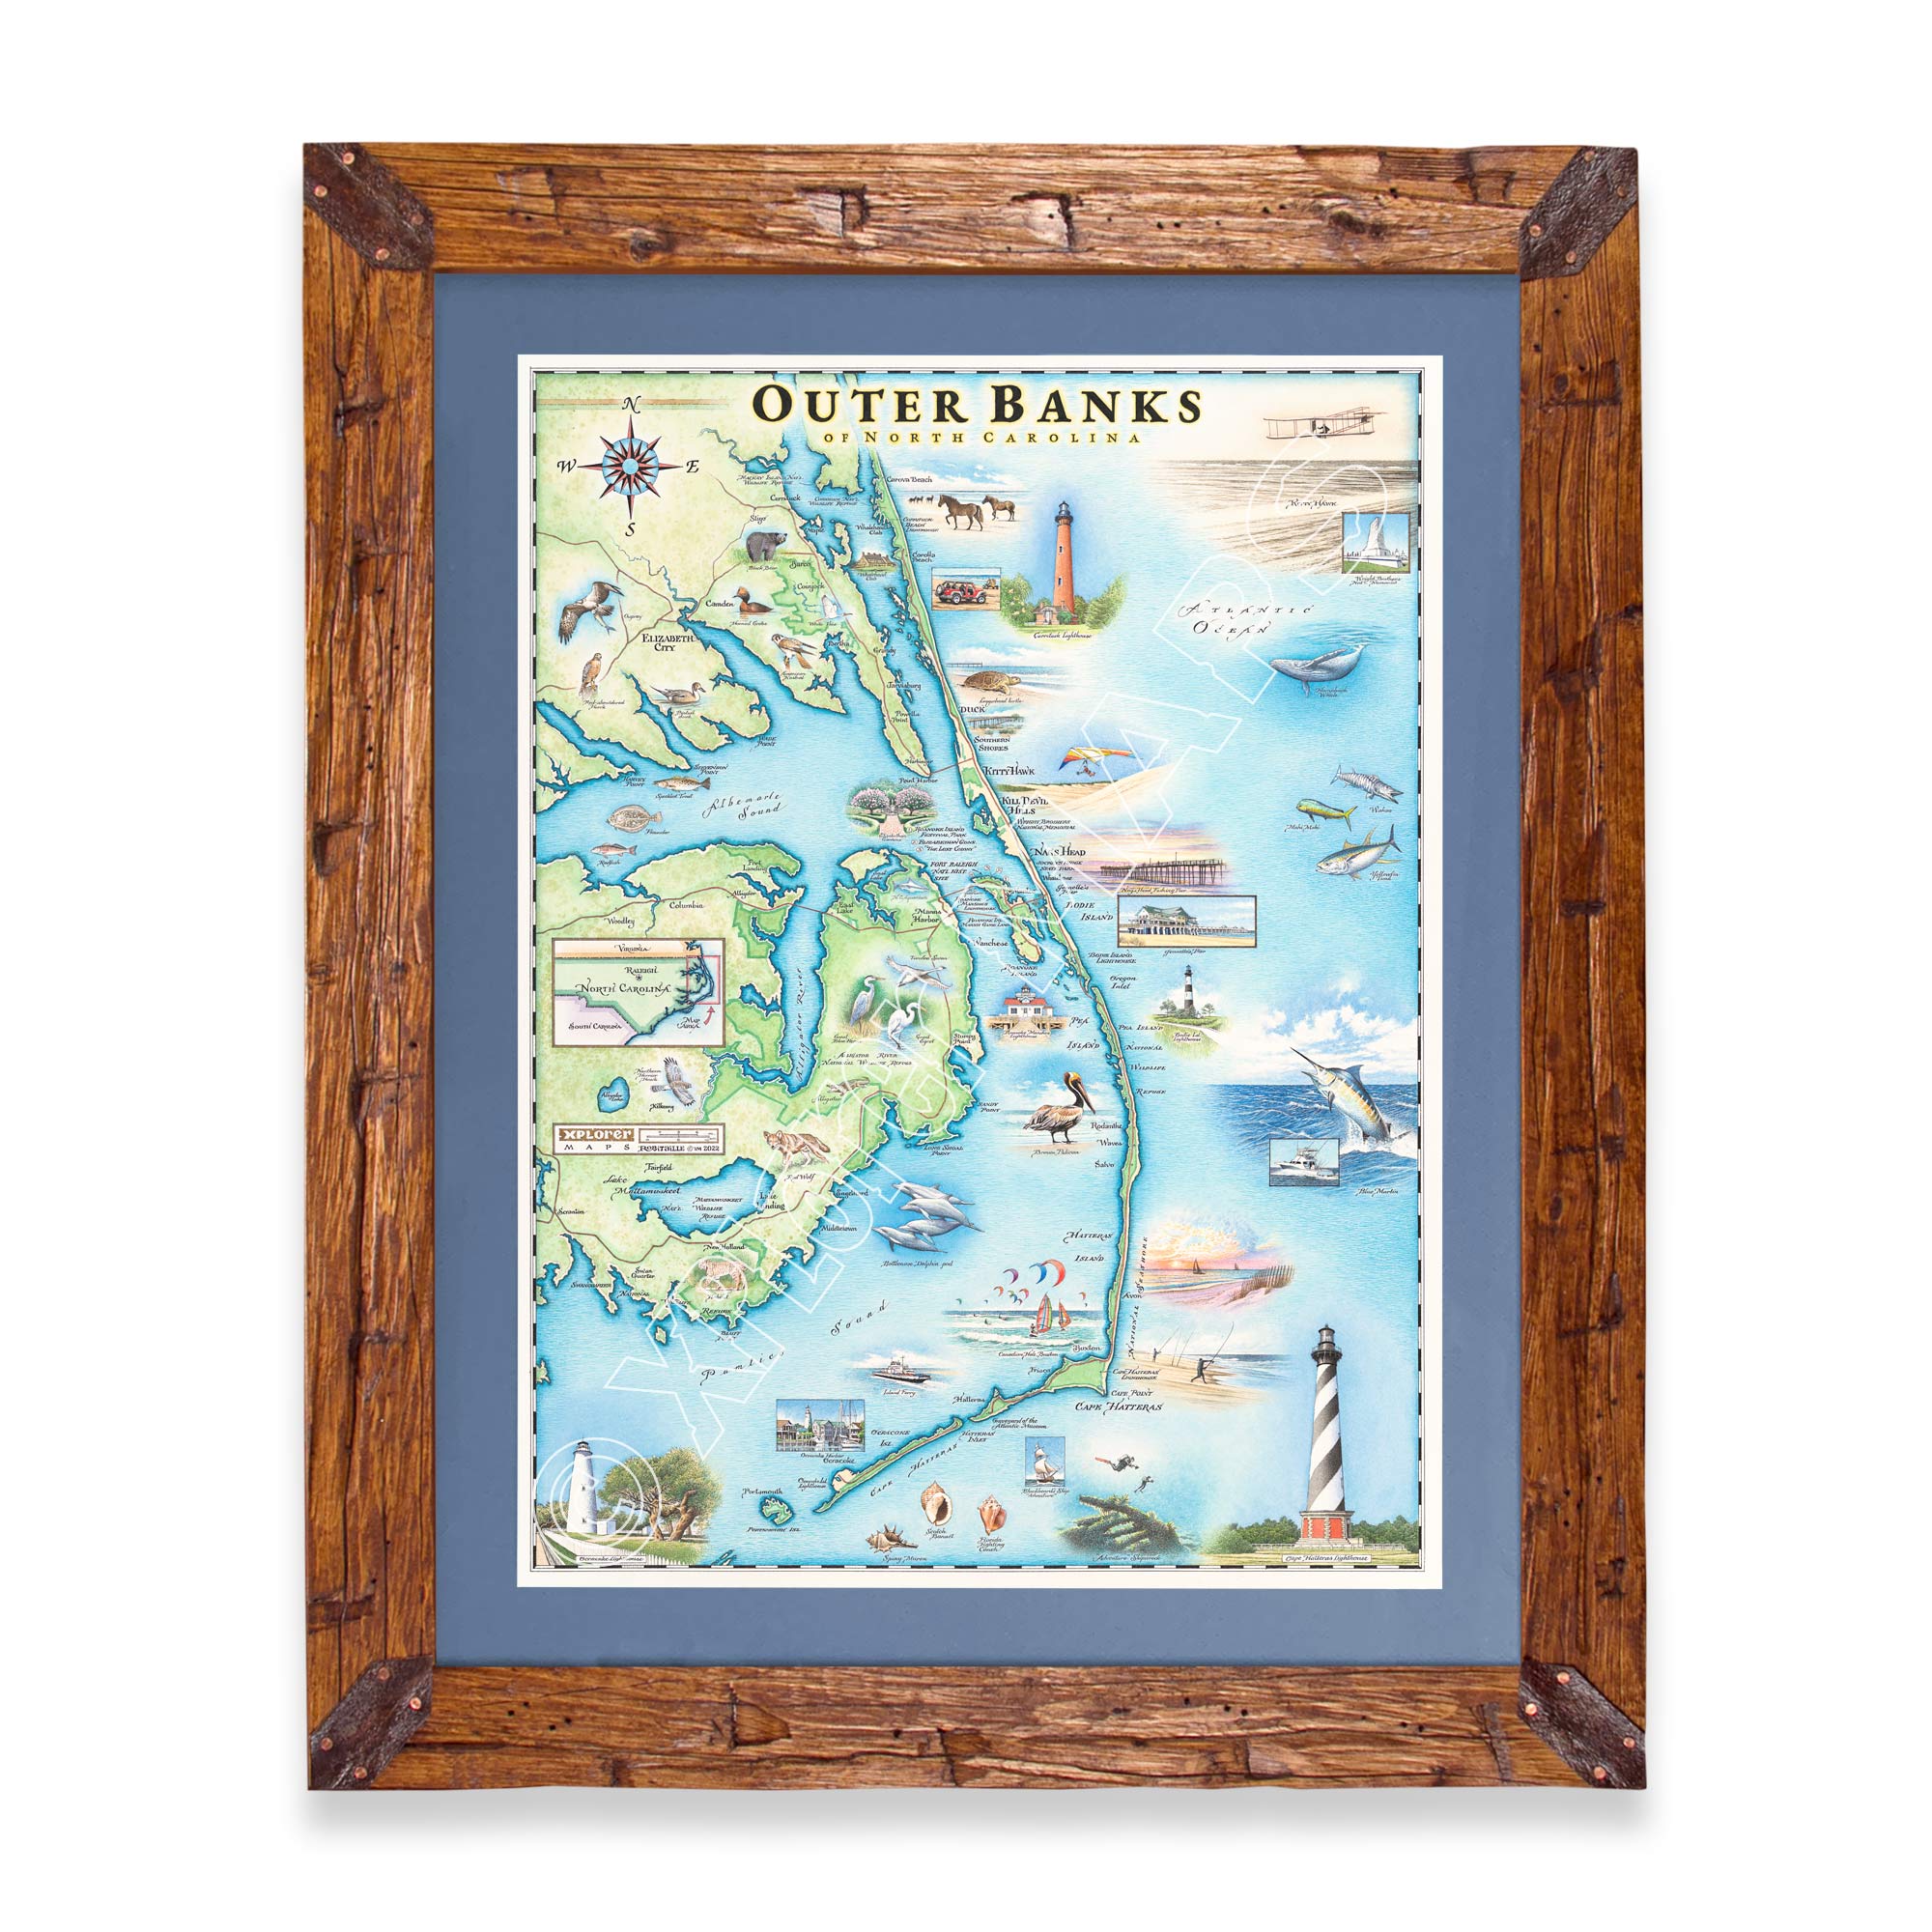 North Carolina's Outer Banks (OBX) hand-drawn map in earth tones blues and greens. The map print is framed in Montana hand-scraped pine with blue mat.